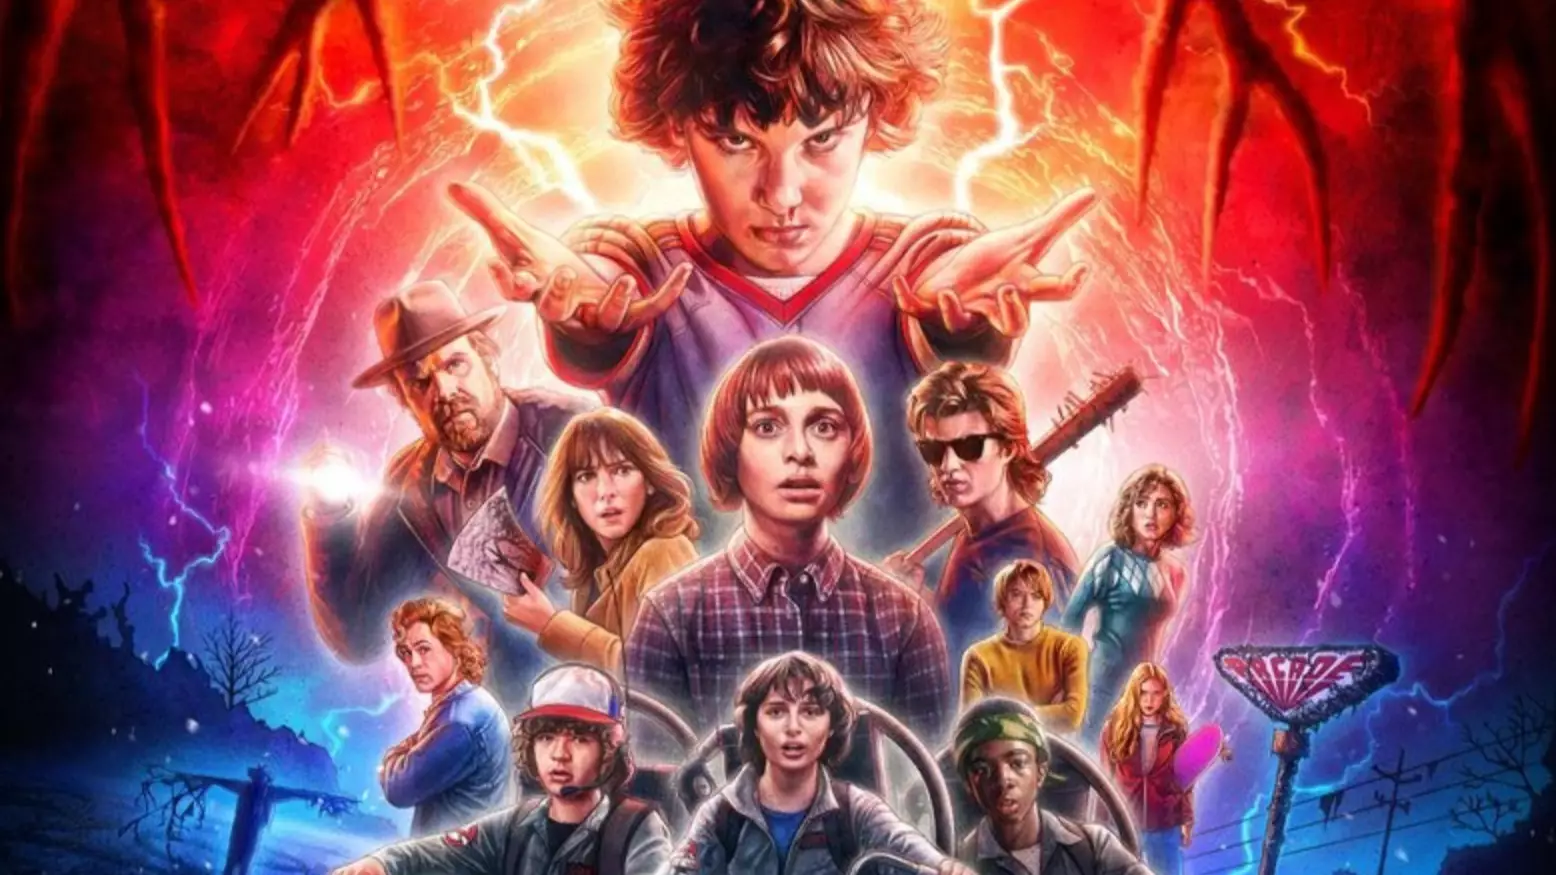 Stephen King Reckons ‘Stranger Things’ Is ‘Balls To The Wall Entertainment’ 